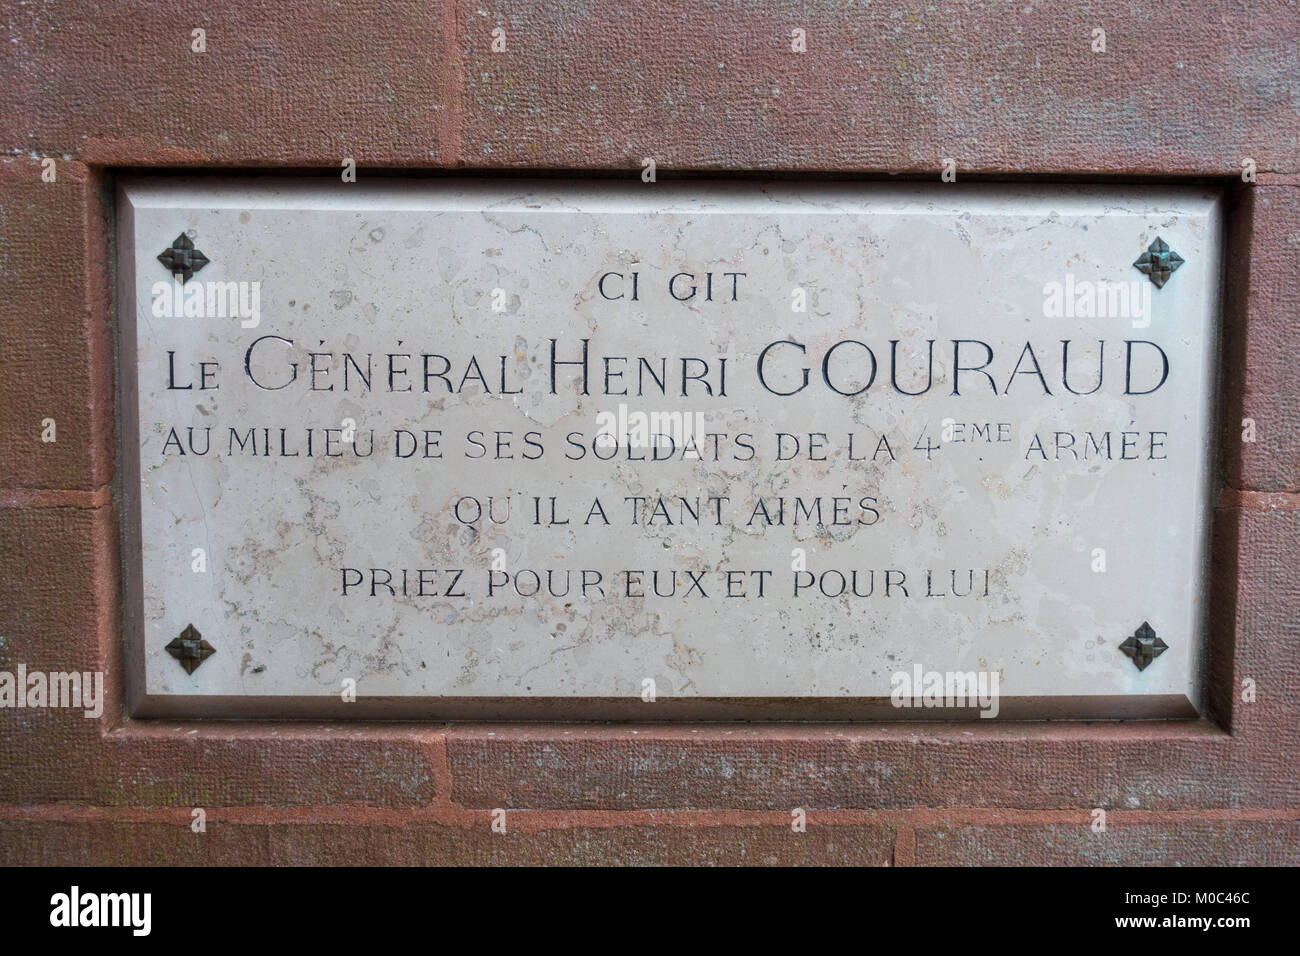 Marble slab remembering General Henri Gouraud, as found on the Monument Ossuaire de Navarin Stock Photo